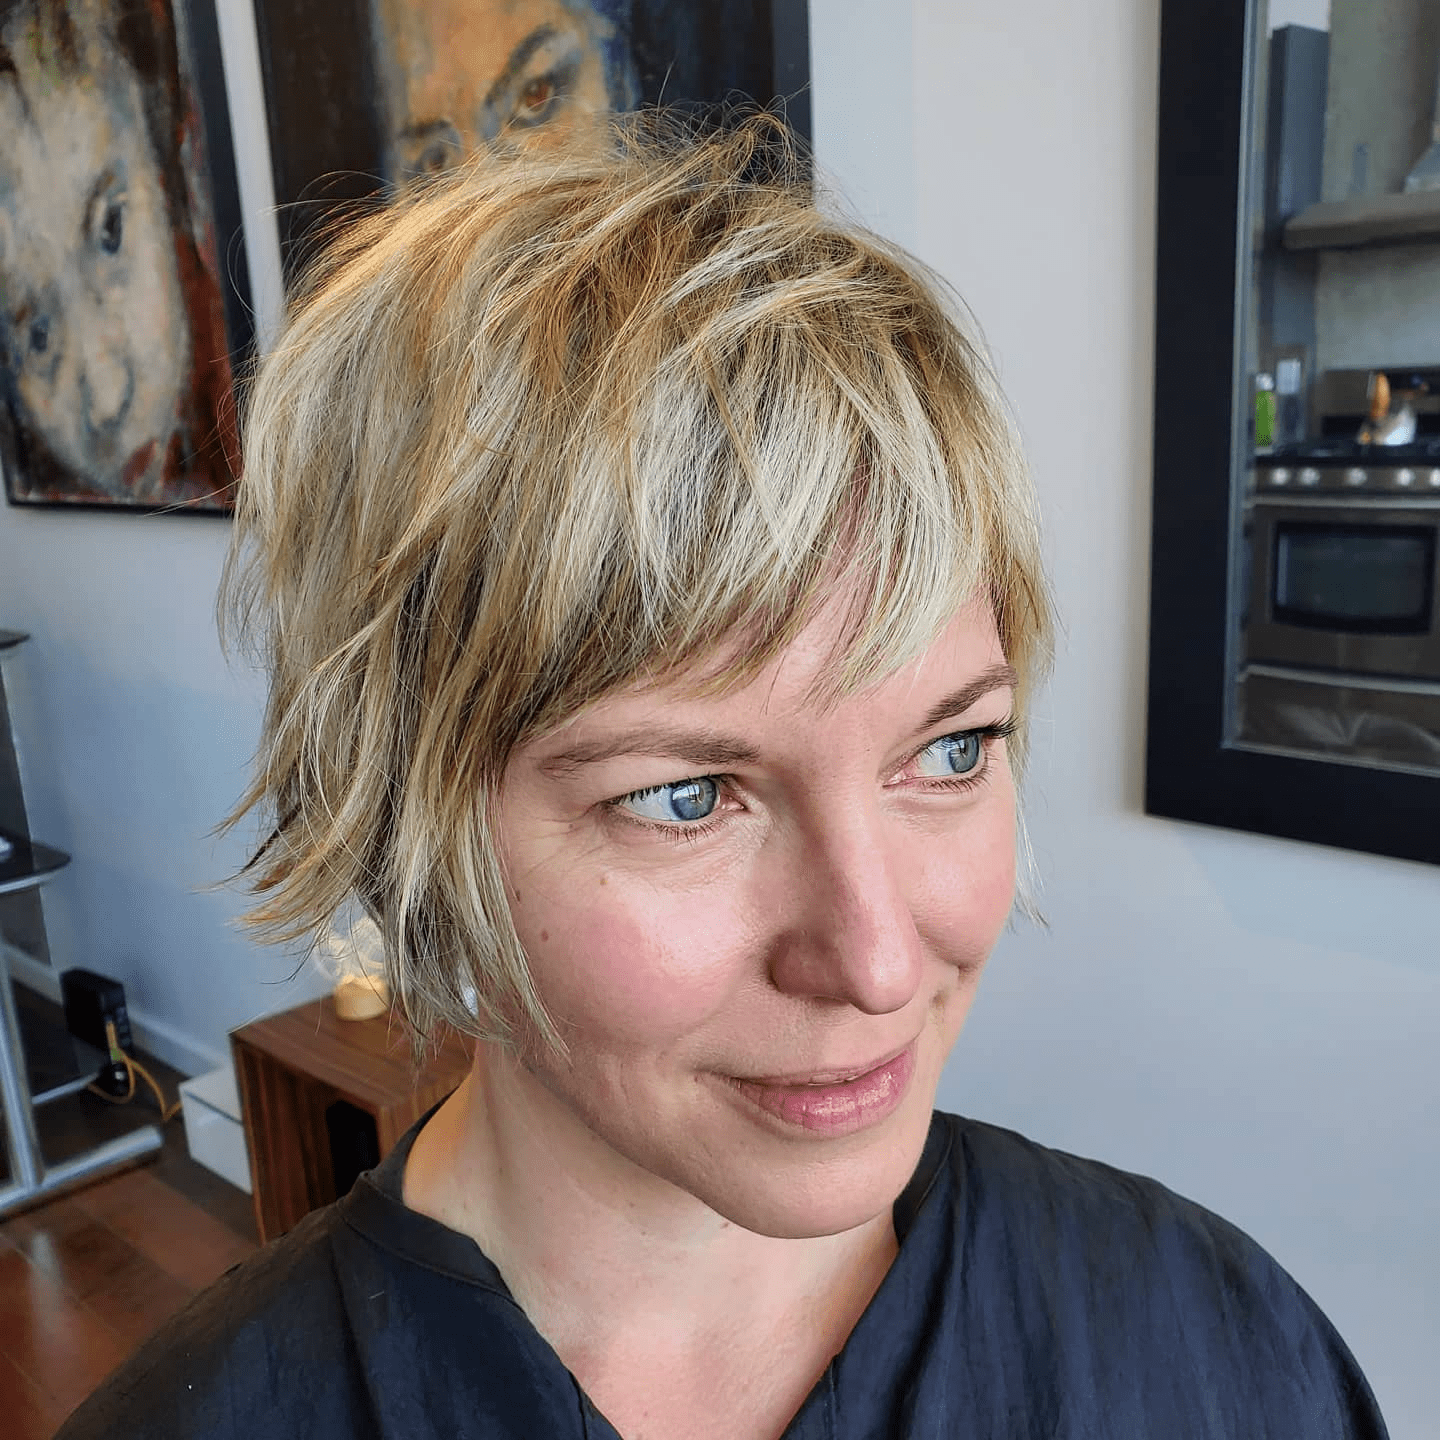 Edgy Texture and Blonde Highlights